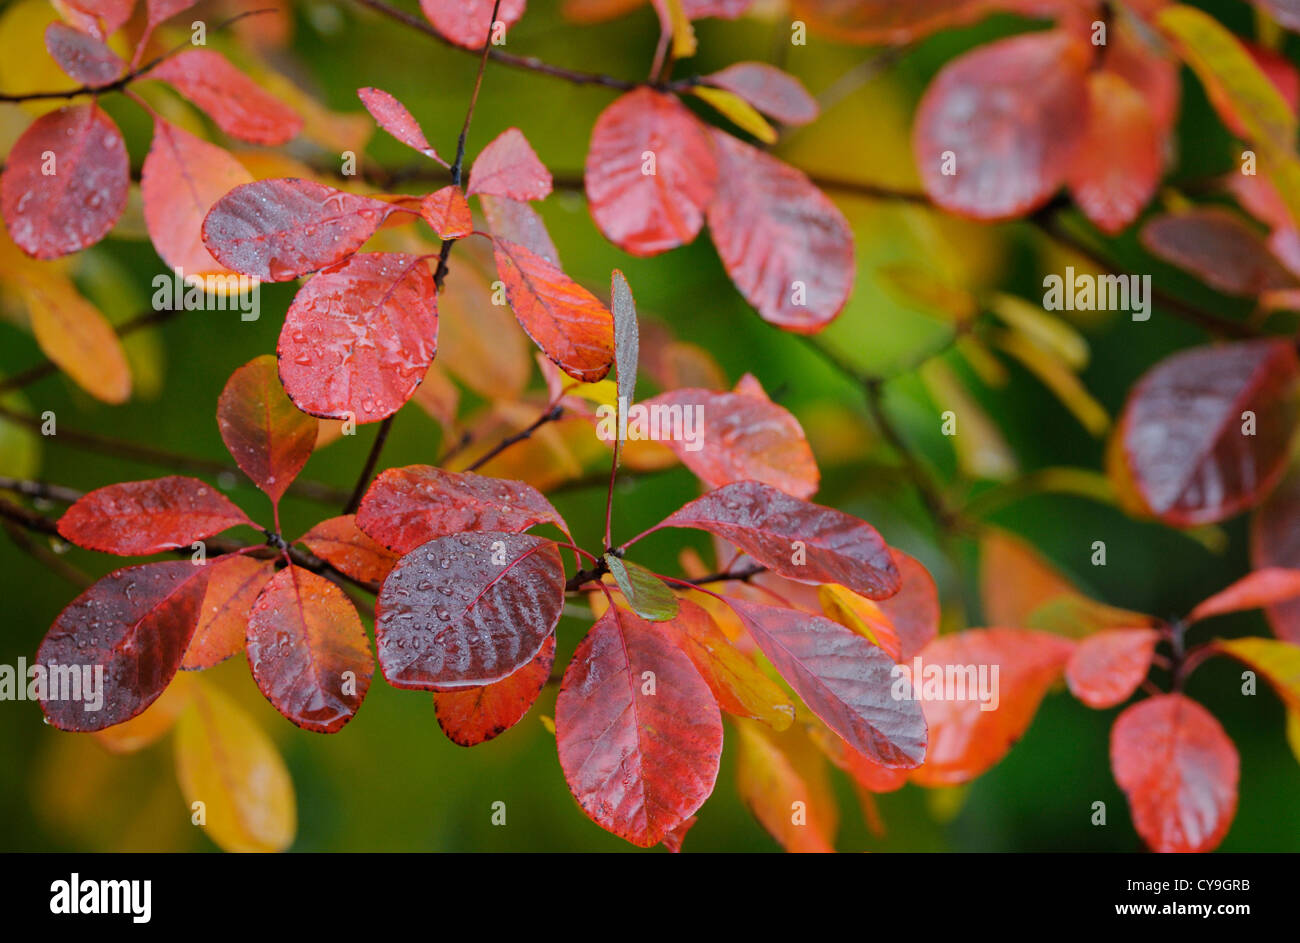 Cotinus coggygria 'Royal Purple', Smoke bush. Close-up of red leaves on branches of the tree. Stock Photo